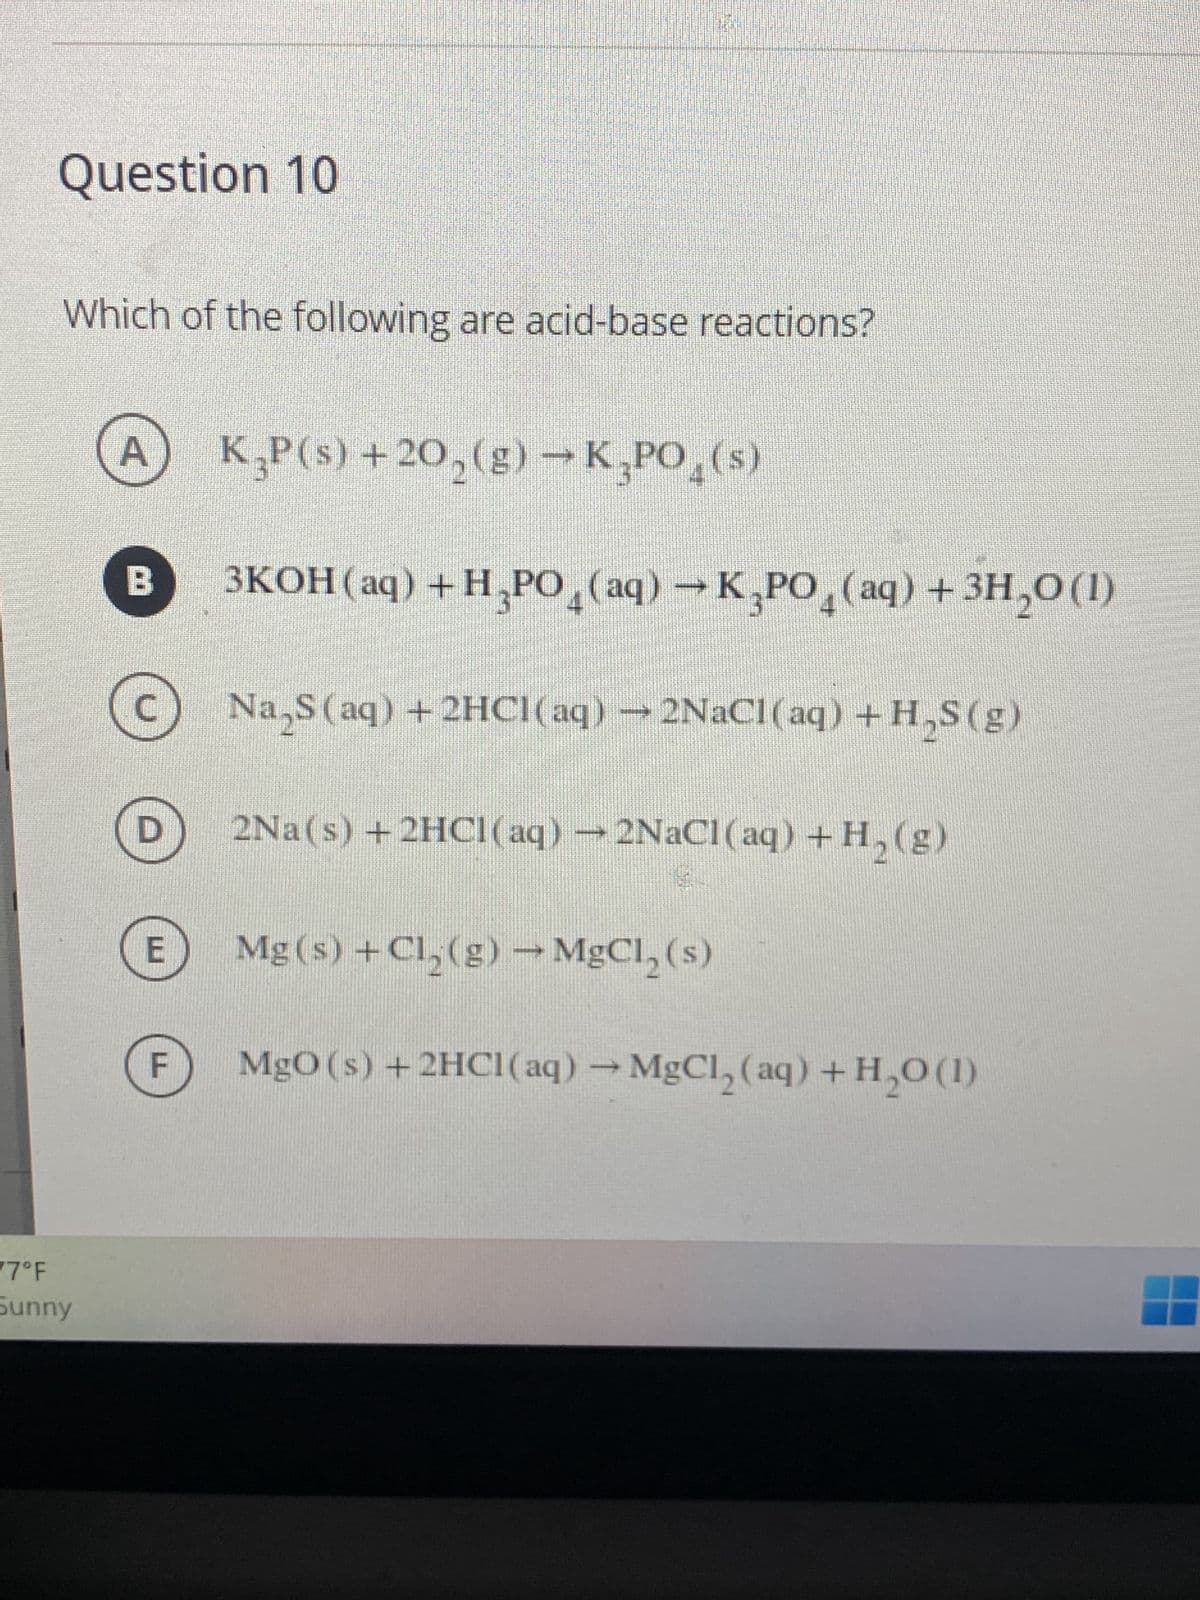 Question 10
Which of the following are acid-base reactions?
A K₂P(s) +20₂(g) →K,PO (s)
B 3KOH(aq) + H₂PO4 (aq) → K₂PO4 (aq) + 3H₂0 (1)
Na₂S (aq) + 2HCl(aq) → 2NaCl(aq) + H₂S(g)
2Na(s) + 2HCl(aq) → 2NaCl(aq) + H₂(g)
Mg(s) + Cl₂(g) → MgCl₂ (s)
MgO (s) + 2HCl(aq) → MgCl₂ (aq) + H₂0 (1)
77°F
Sunny
U
D
F